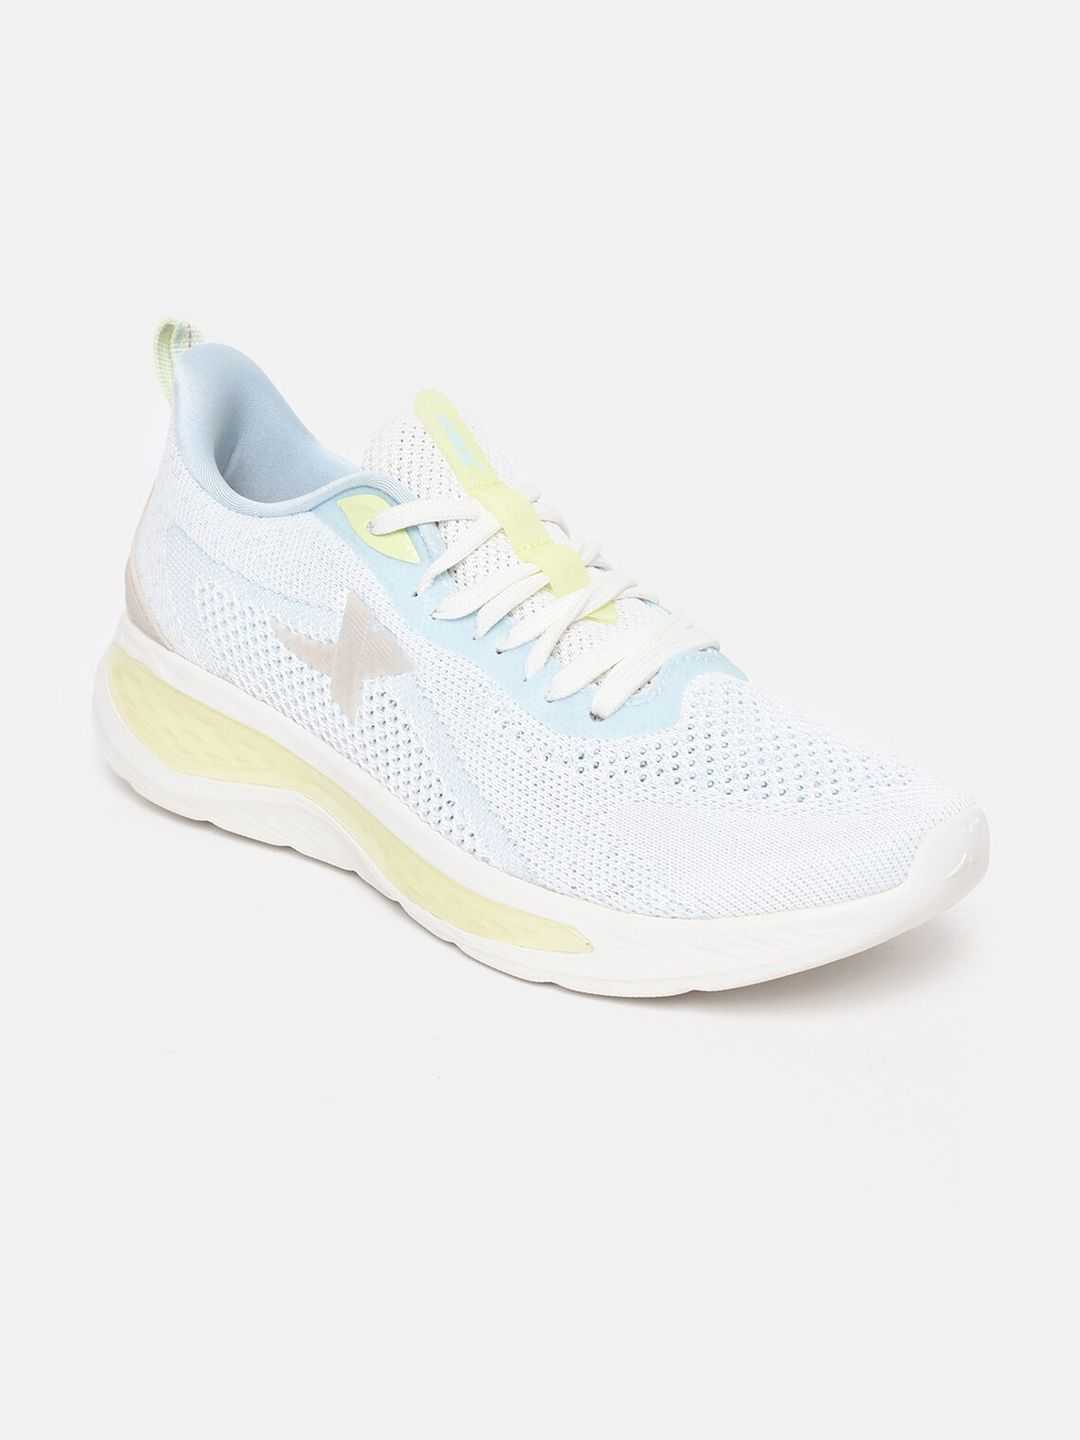 Xtep Women White Textile Running Non-Marking Sports Attitude Shoes Price in India